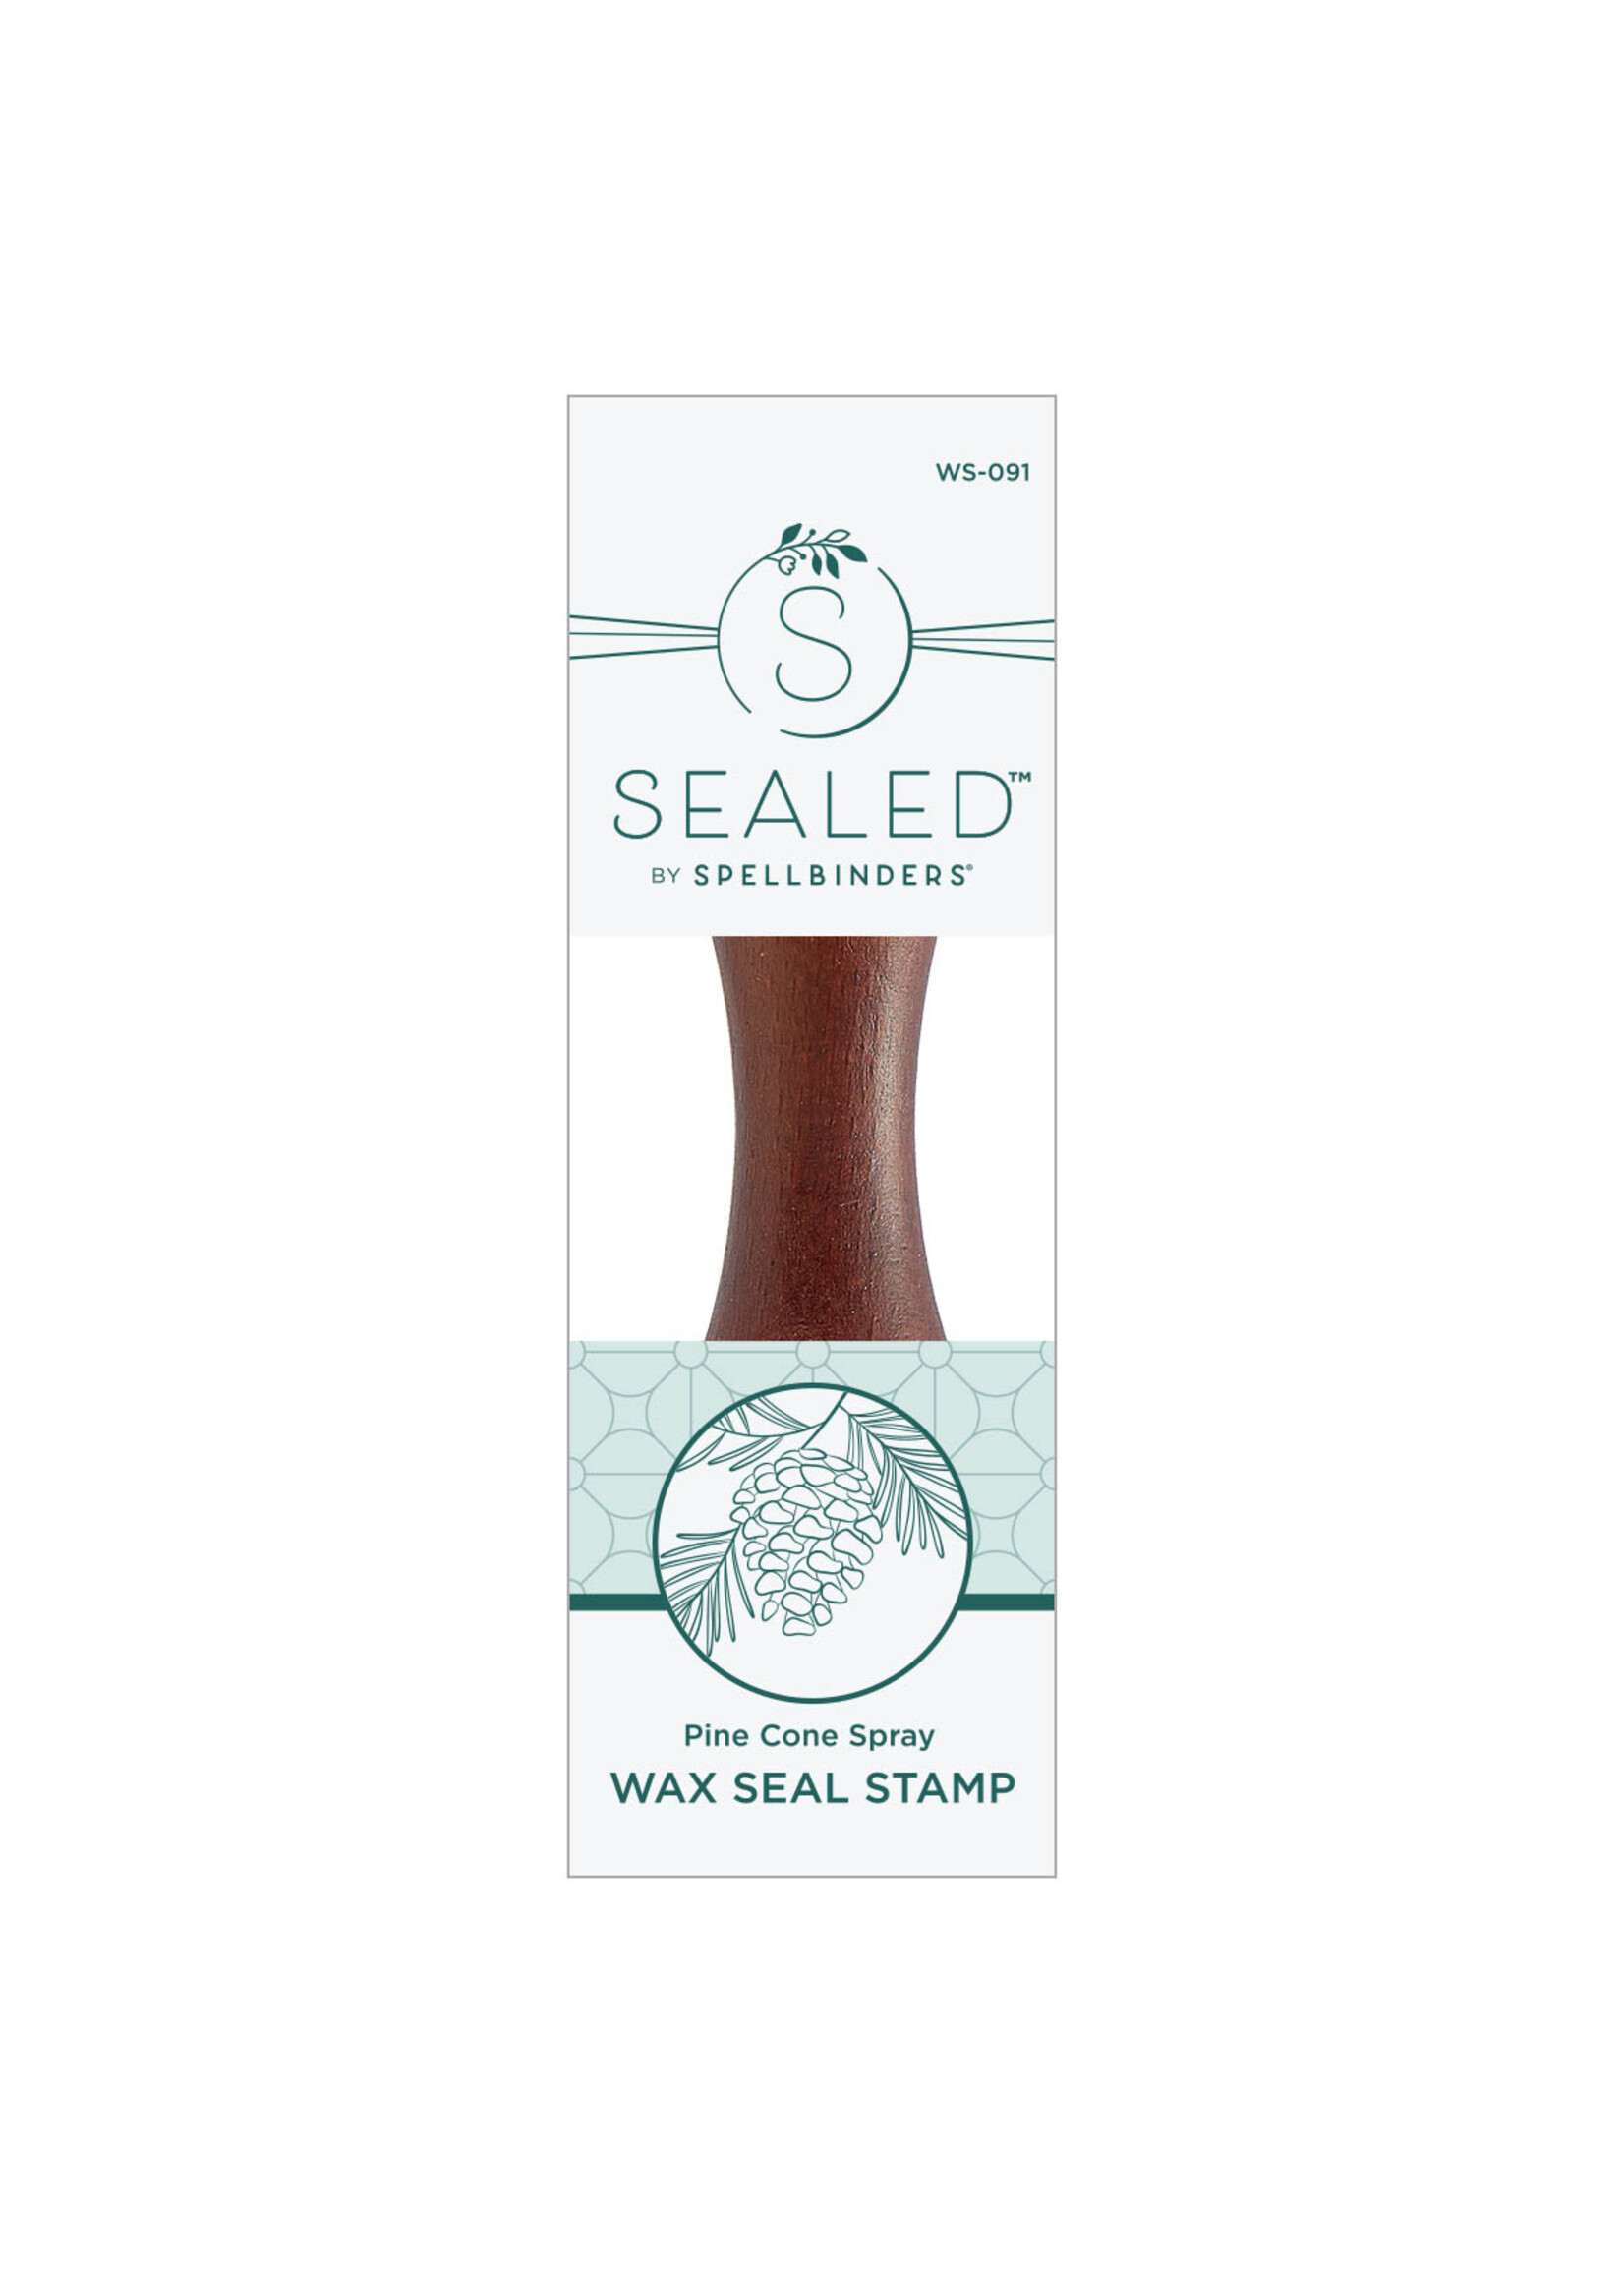 spellbinders Pine Cone Spray Wax Seal Stamp from the Sealed for Christmas Collection